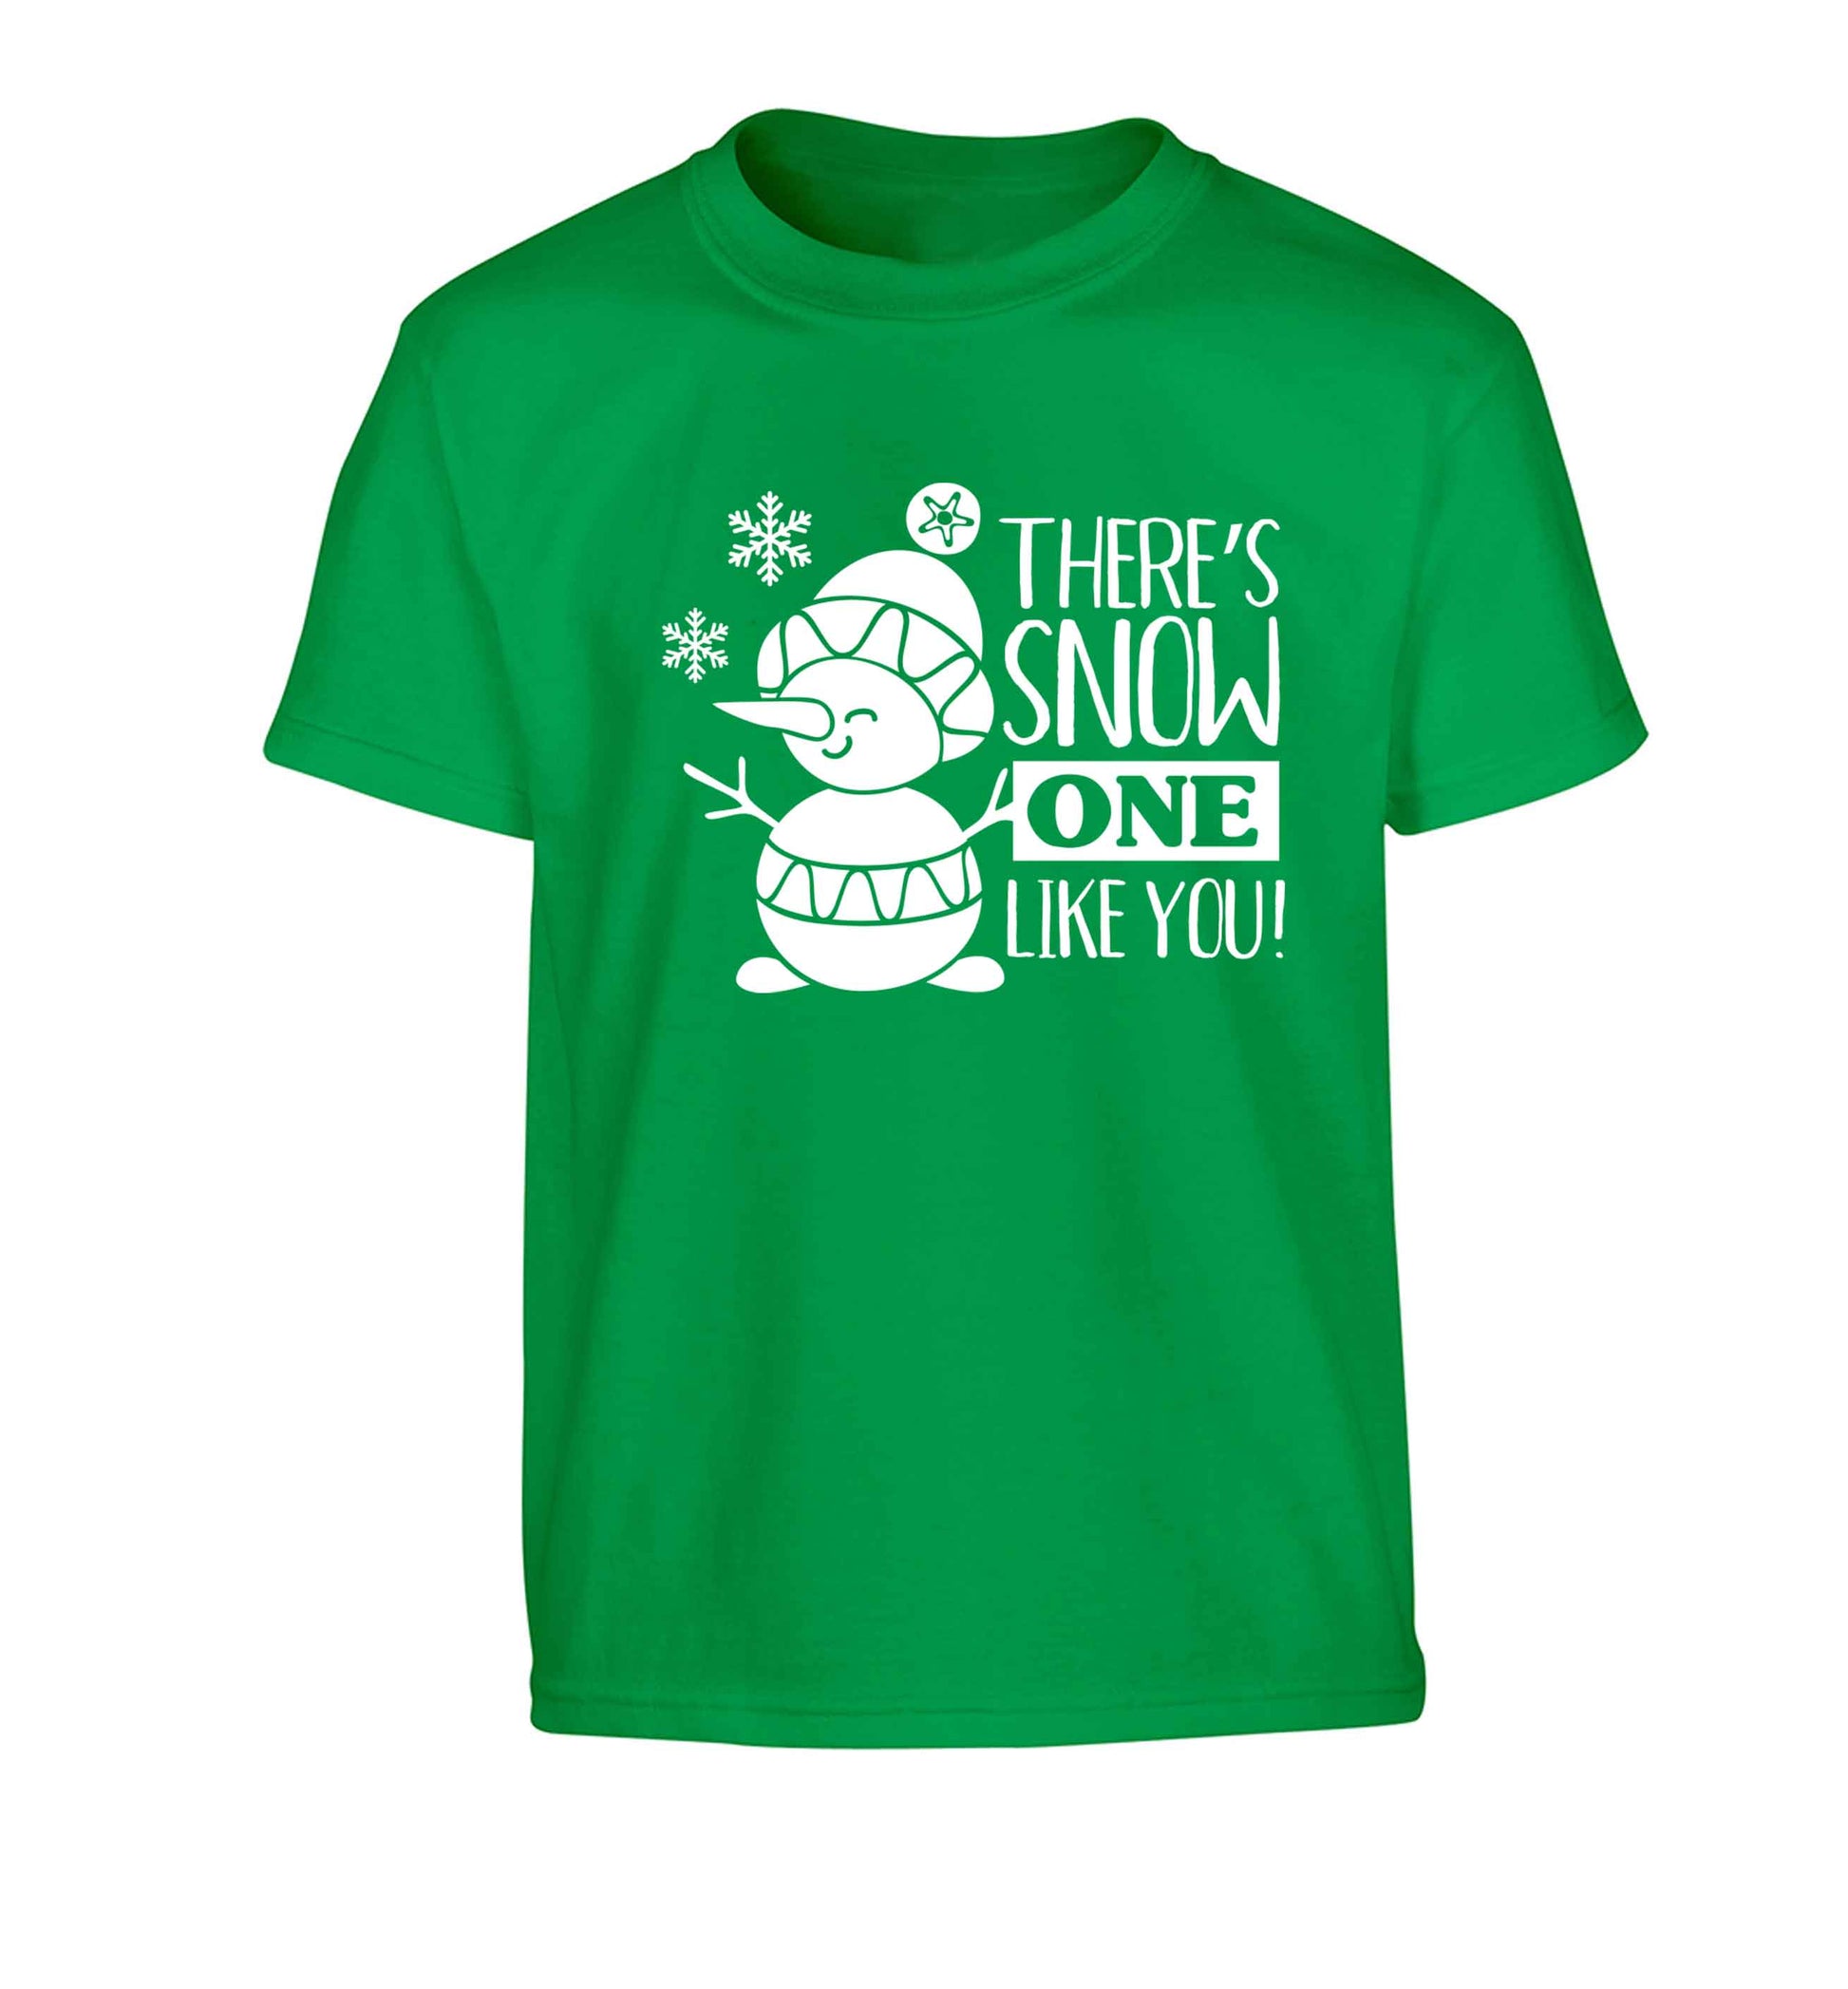 There's snow one like you Children's green Tshirt 12-13 Years